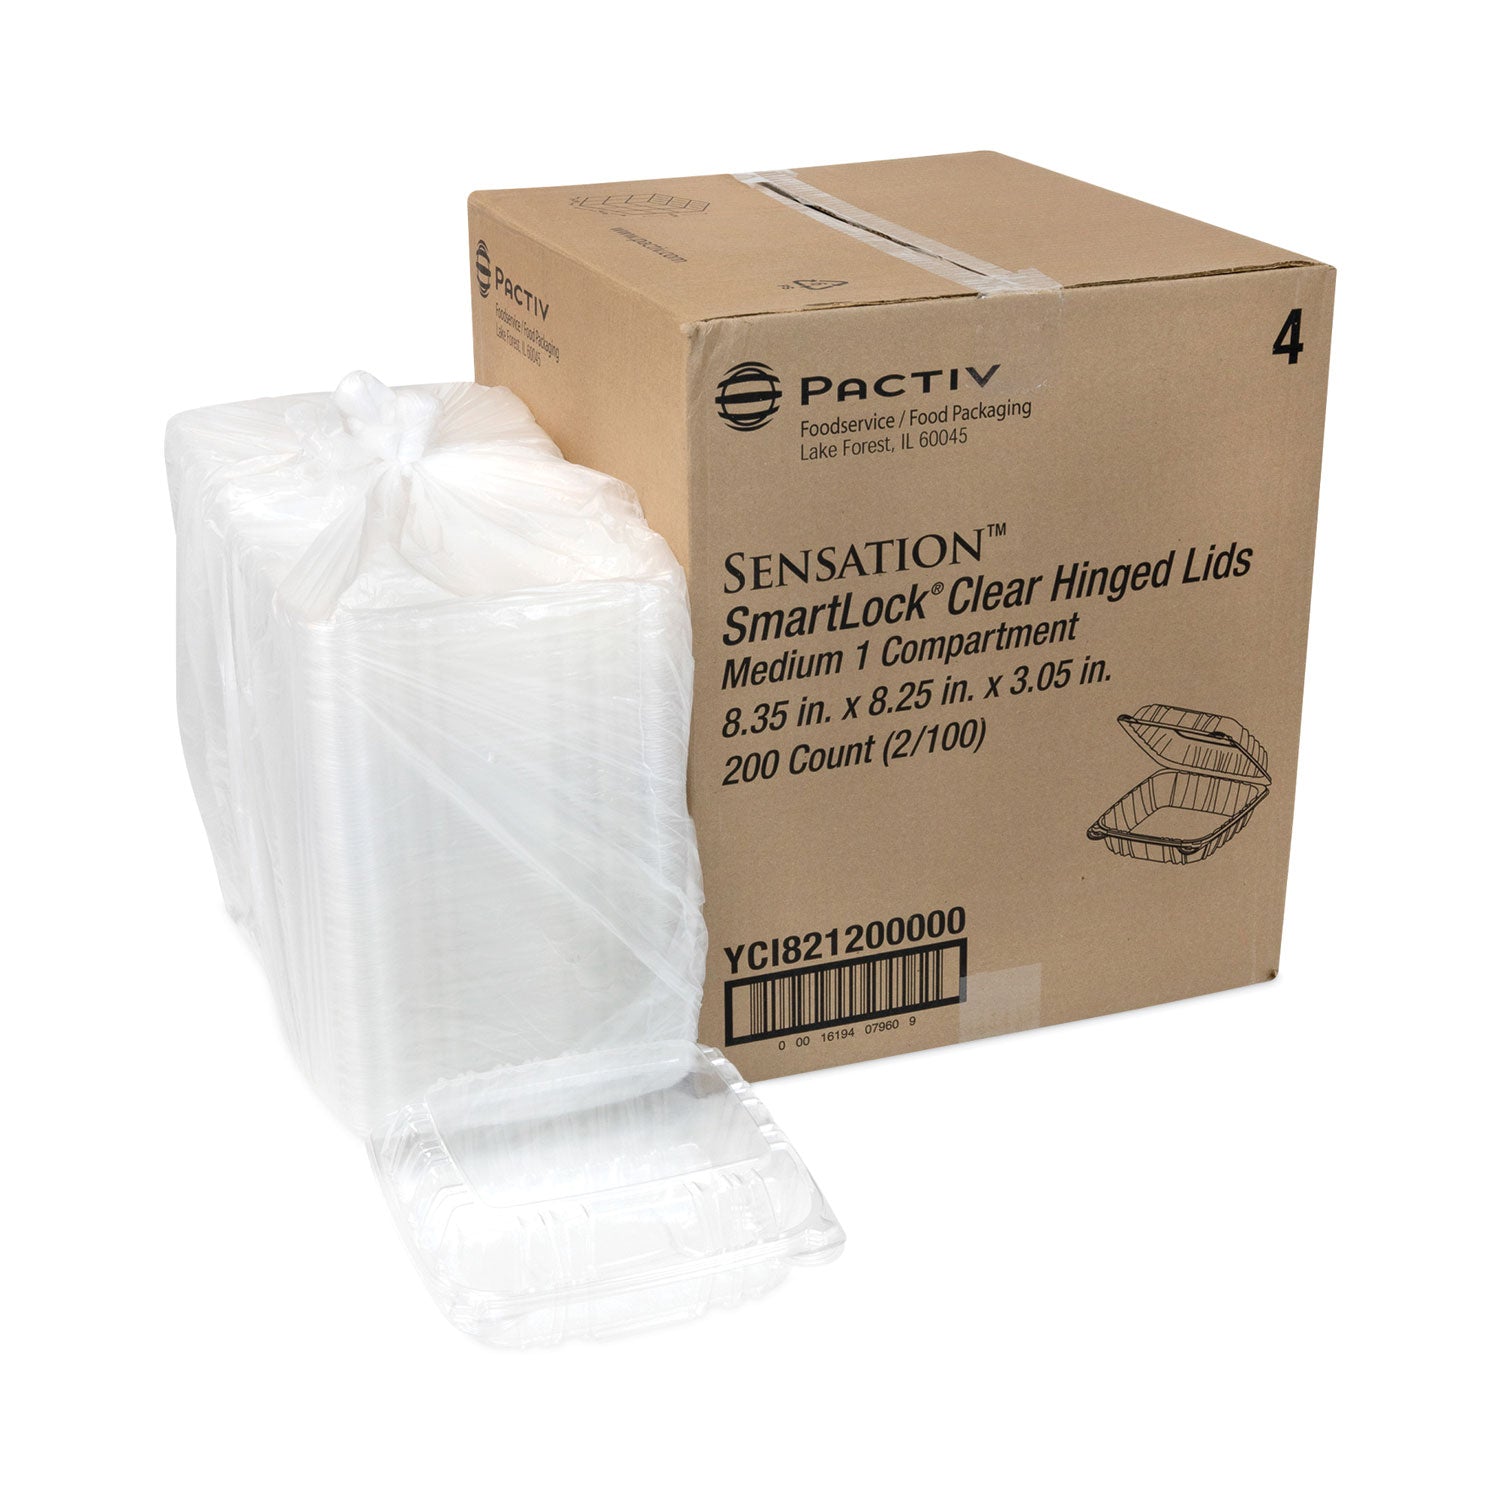 sensation-smartlock-hinged-lid-container-834-x-824-x-305-clear-plastic-200-carton_pctyci821200000 - 5